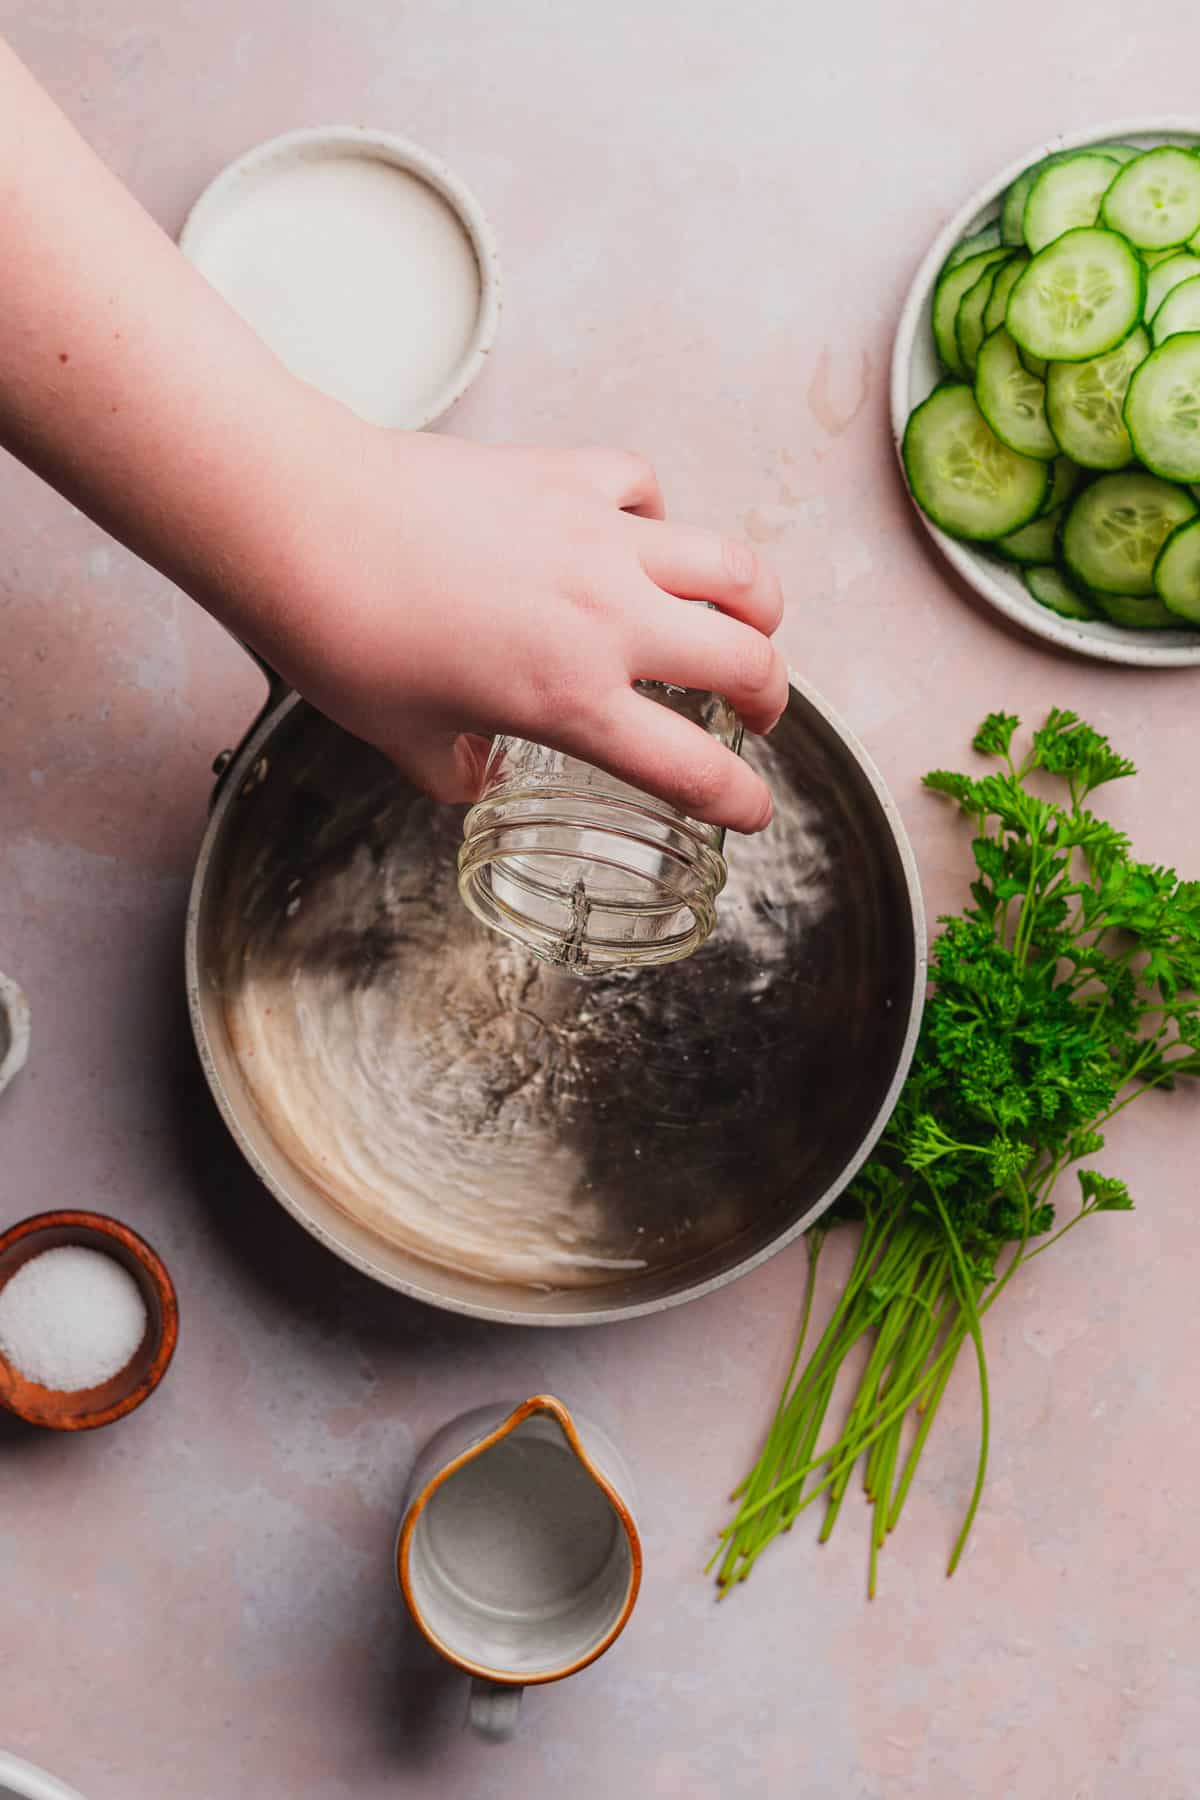 hand pouring vinegar into a saucepan surrounded by cucumbers, seasonings, and parsley.